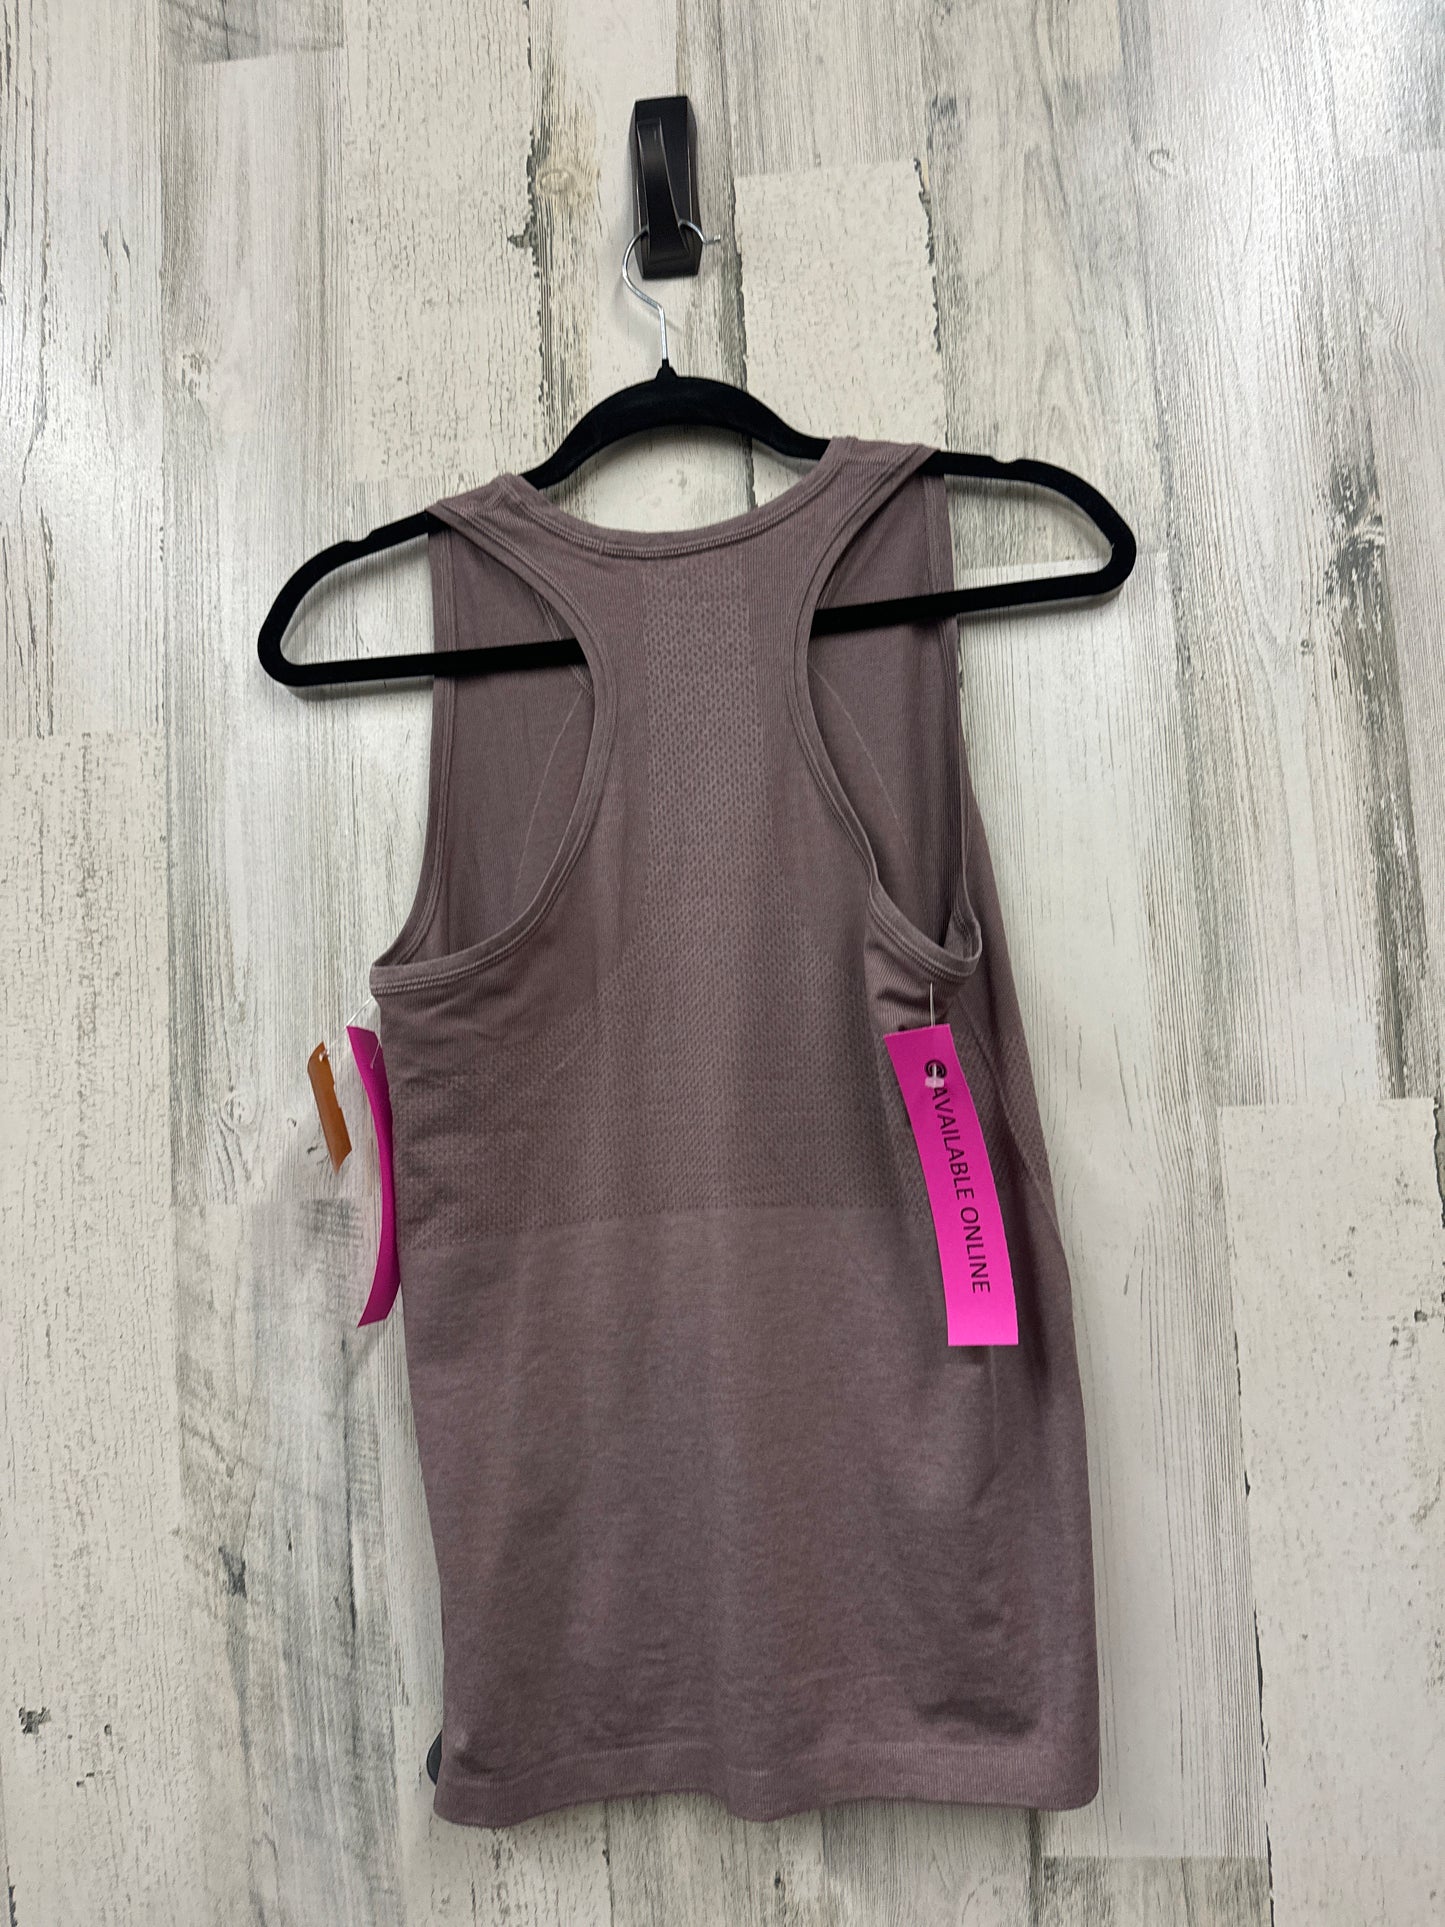 Athletic Tank Top By Banana Republic  Size: M